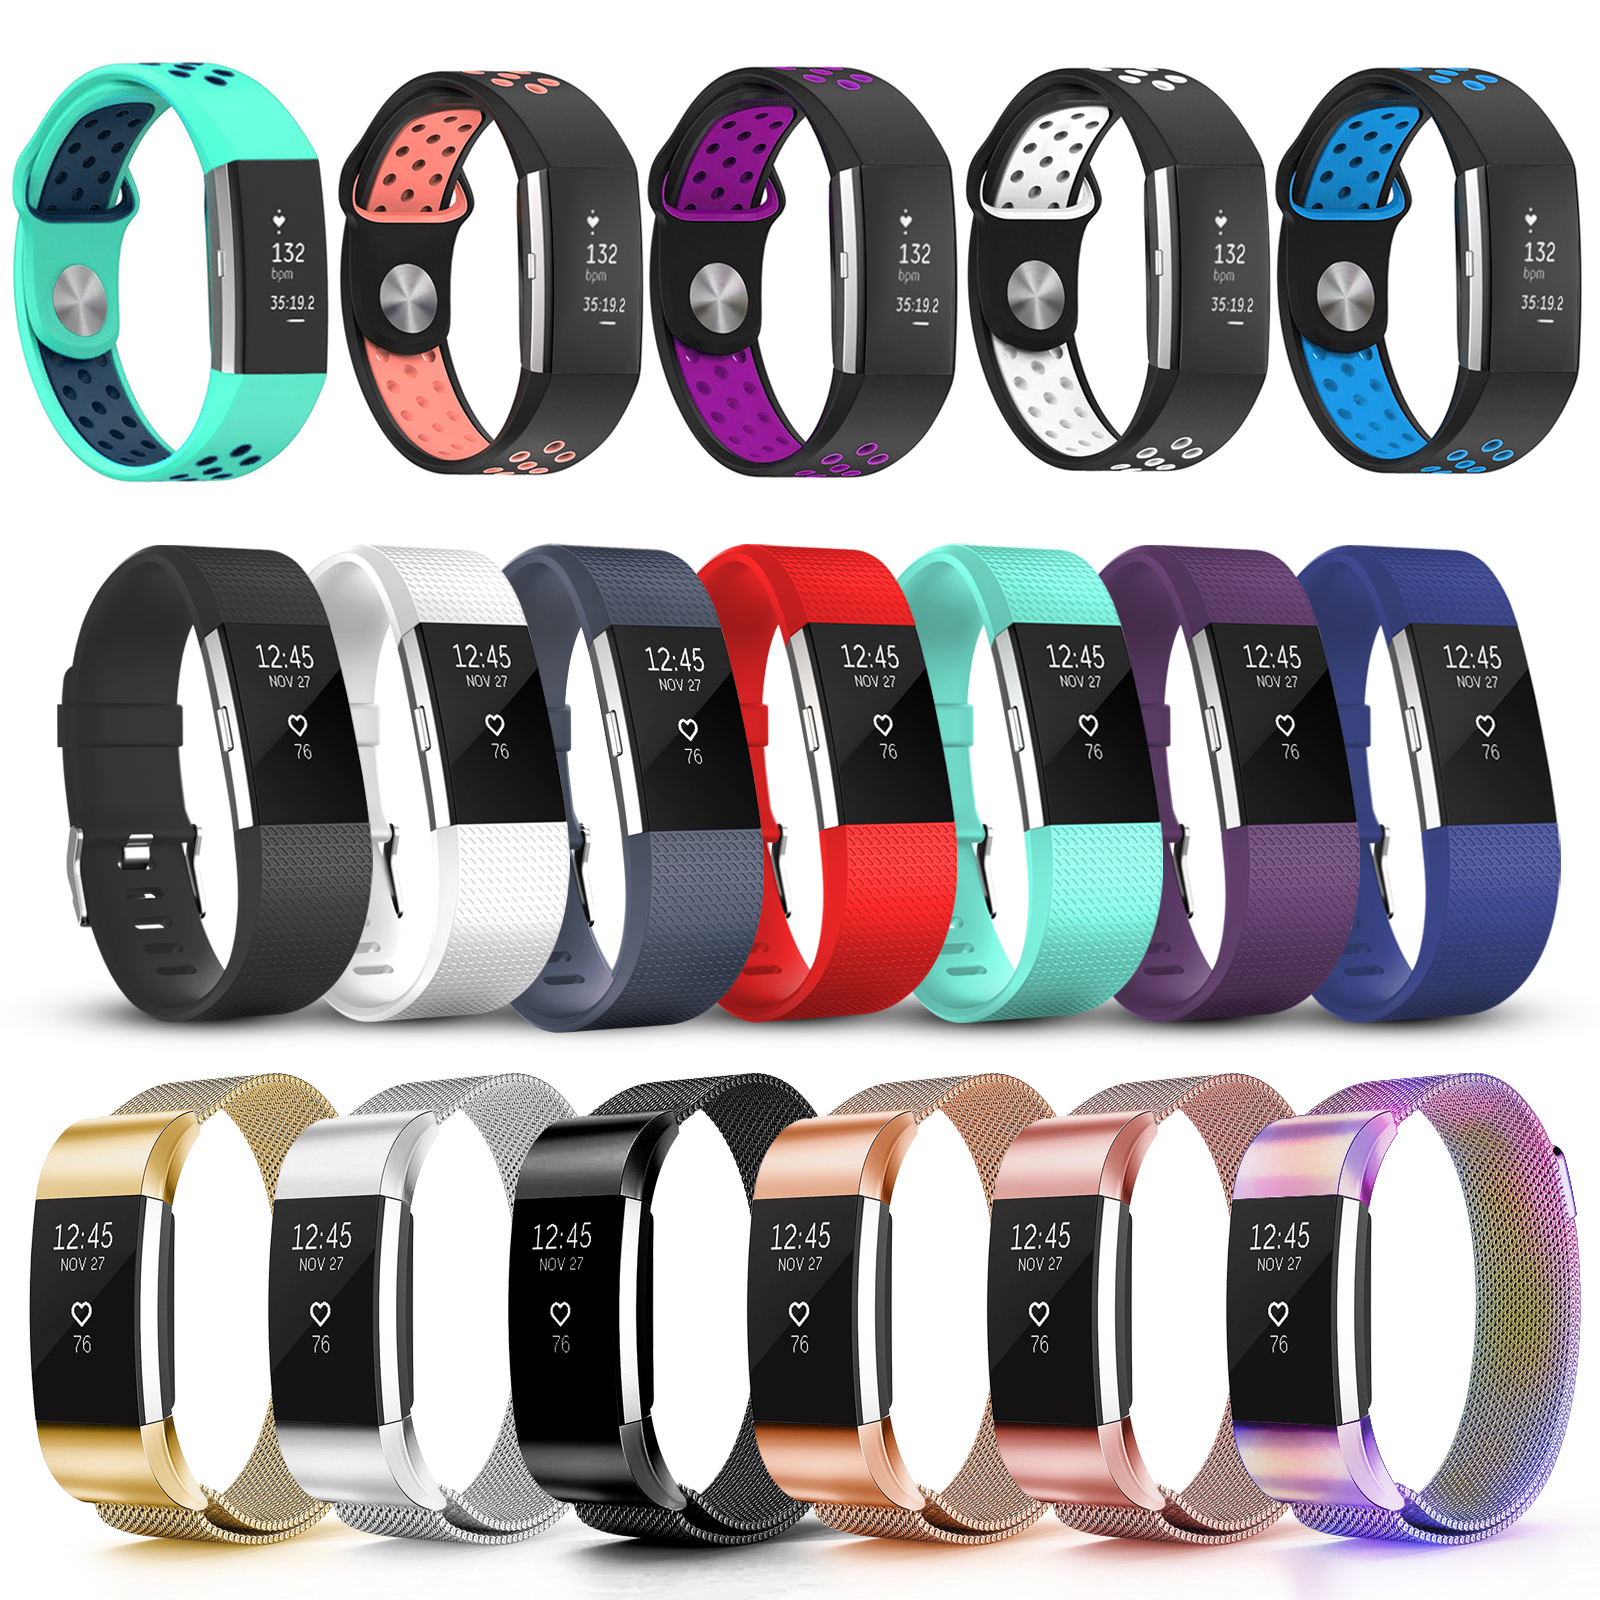 fit charge 2 bands